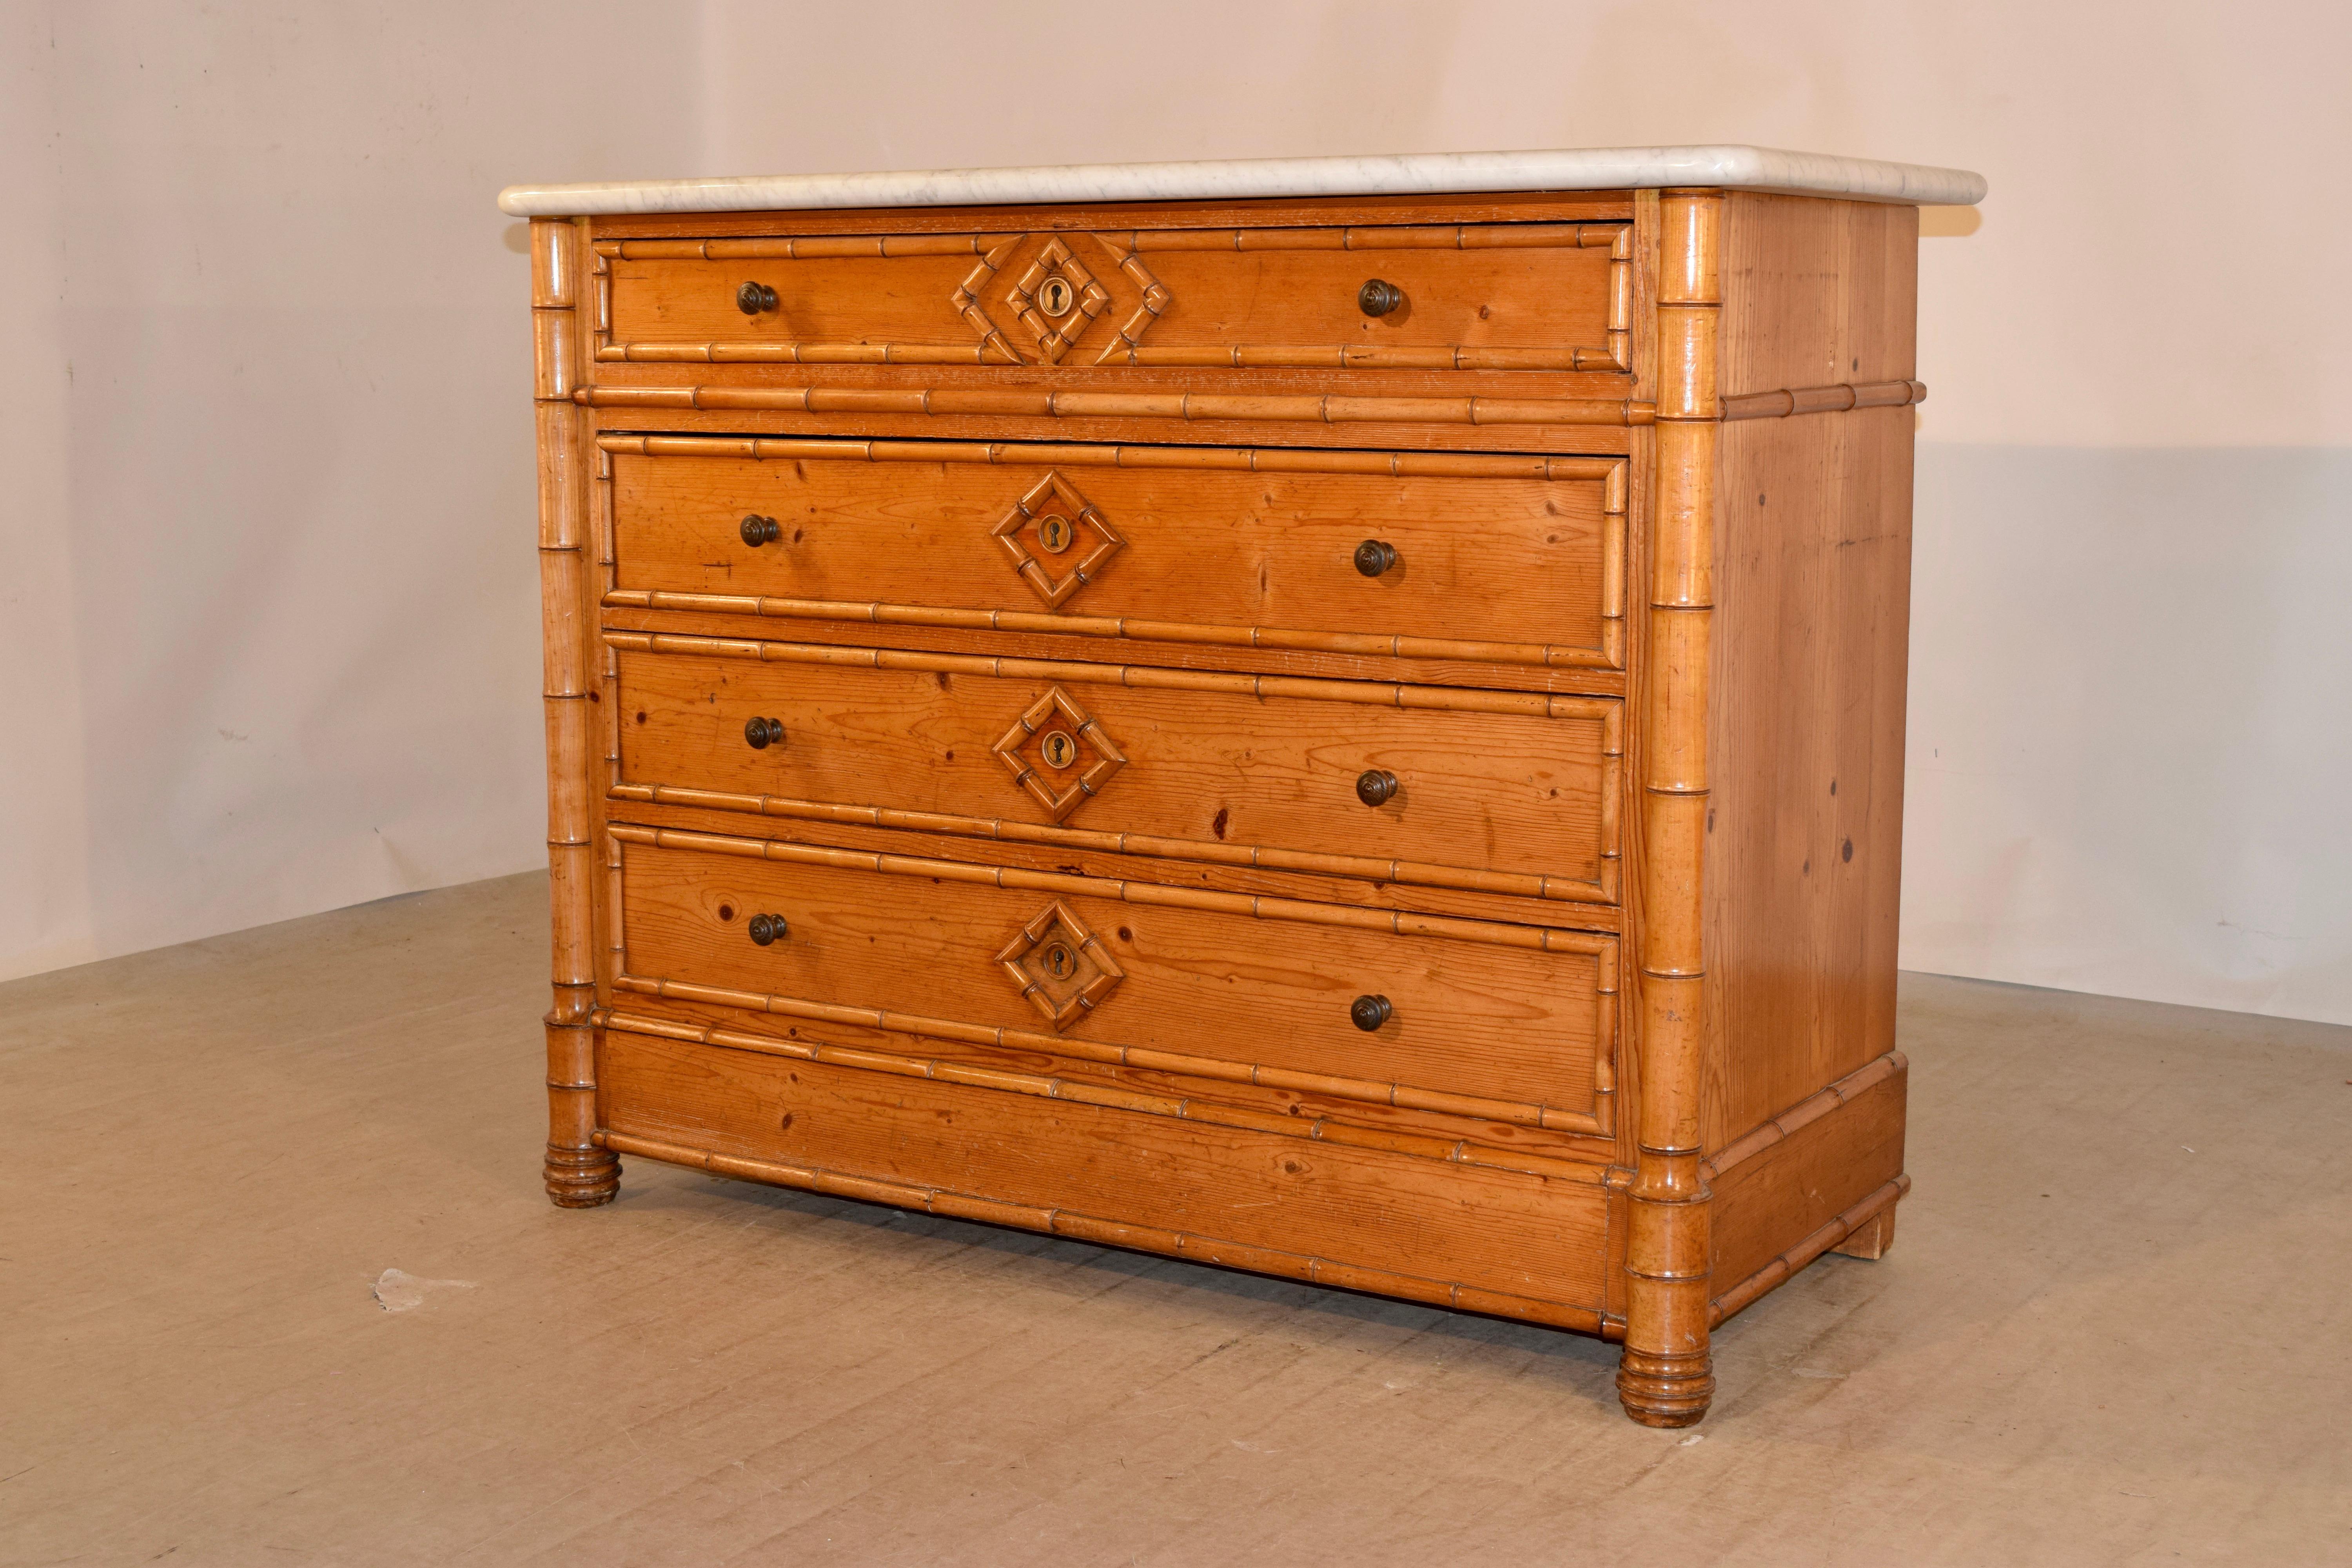 19th century faux bamboo chest of drawers made from cherry and pine. The top is Carrara marble, and follows down to simple sides with hand turned faux bamboo moldings and four drawers in the front, also with faux bamboo moldings. The drawers are